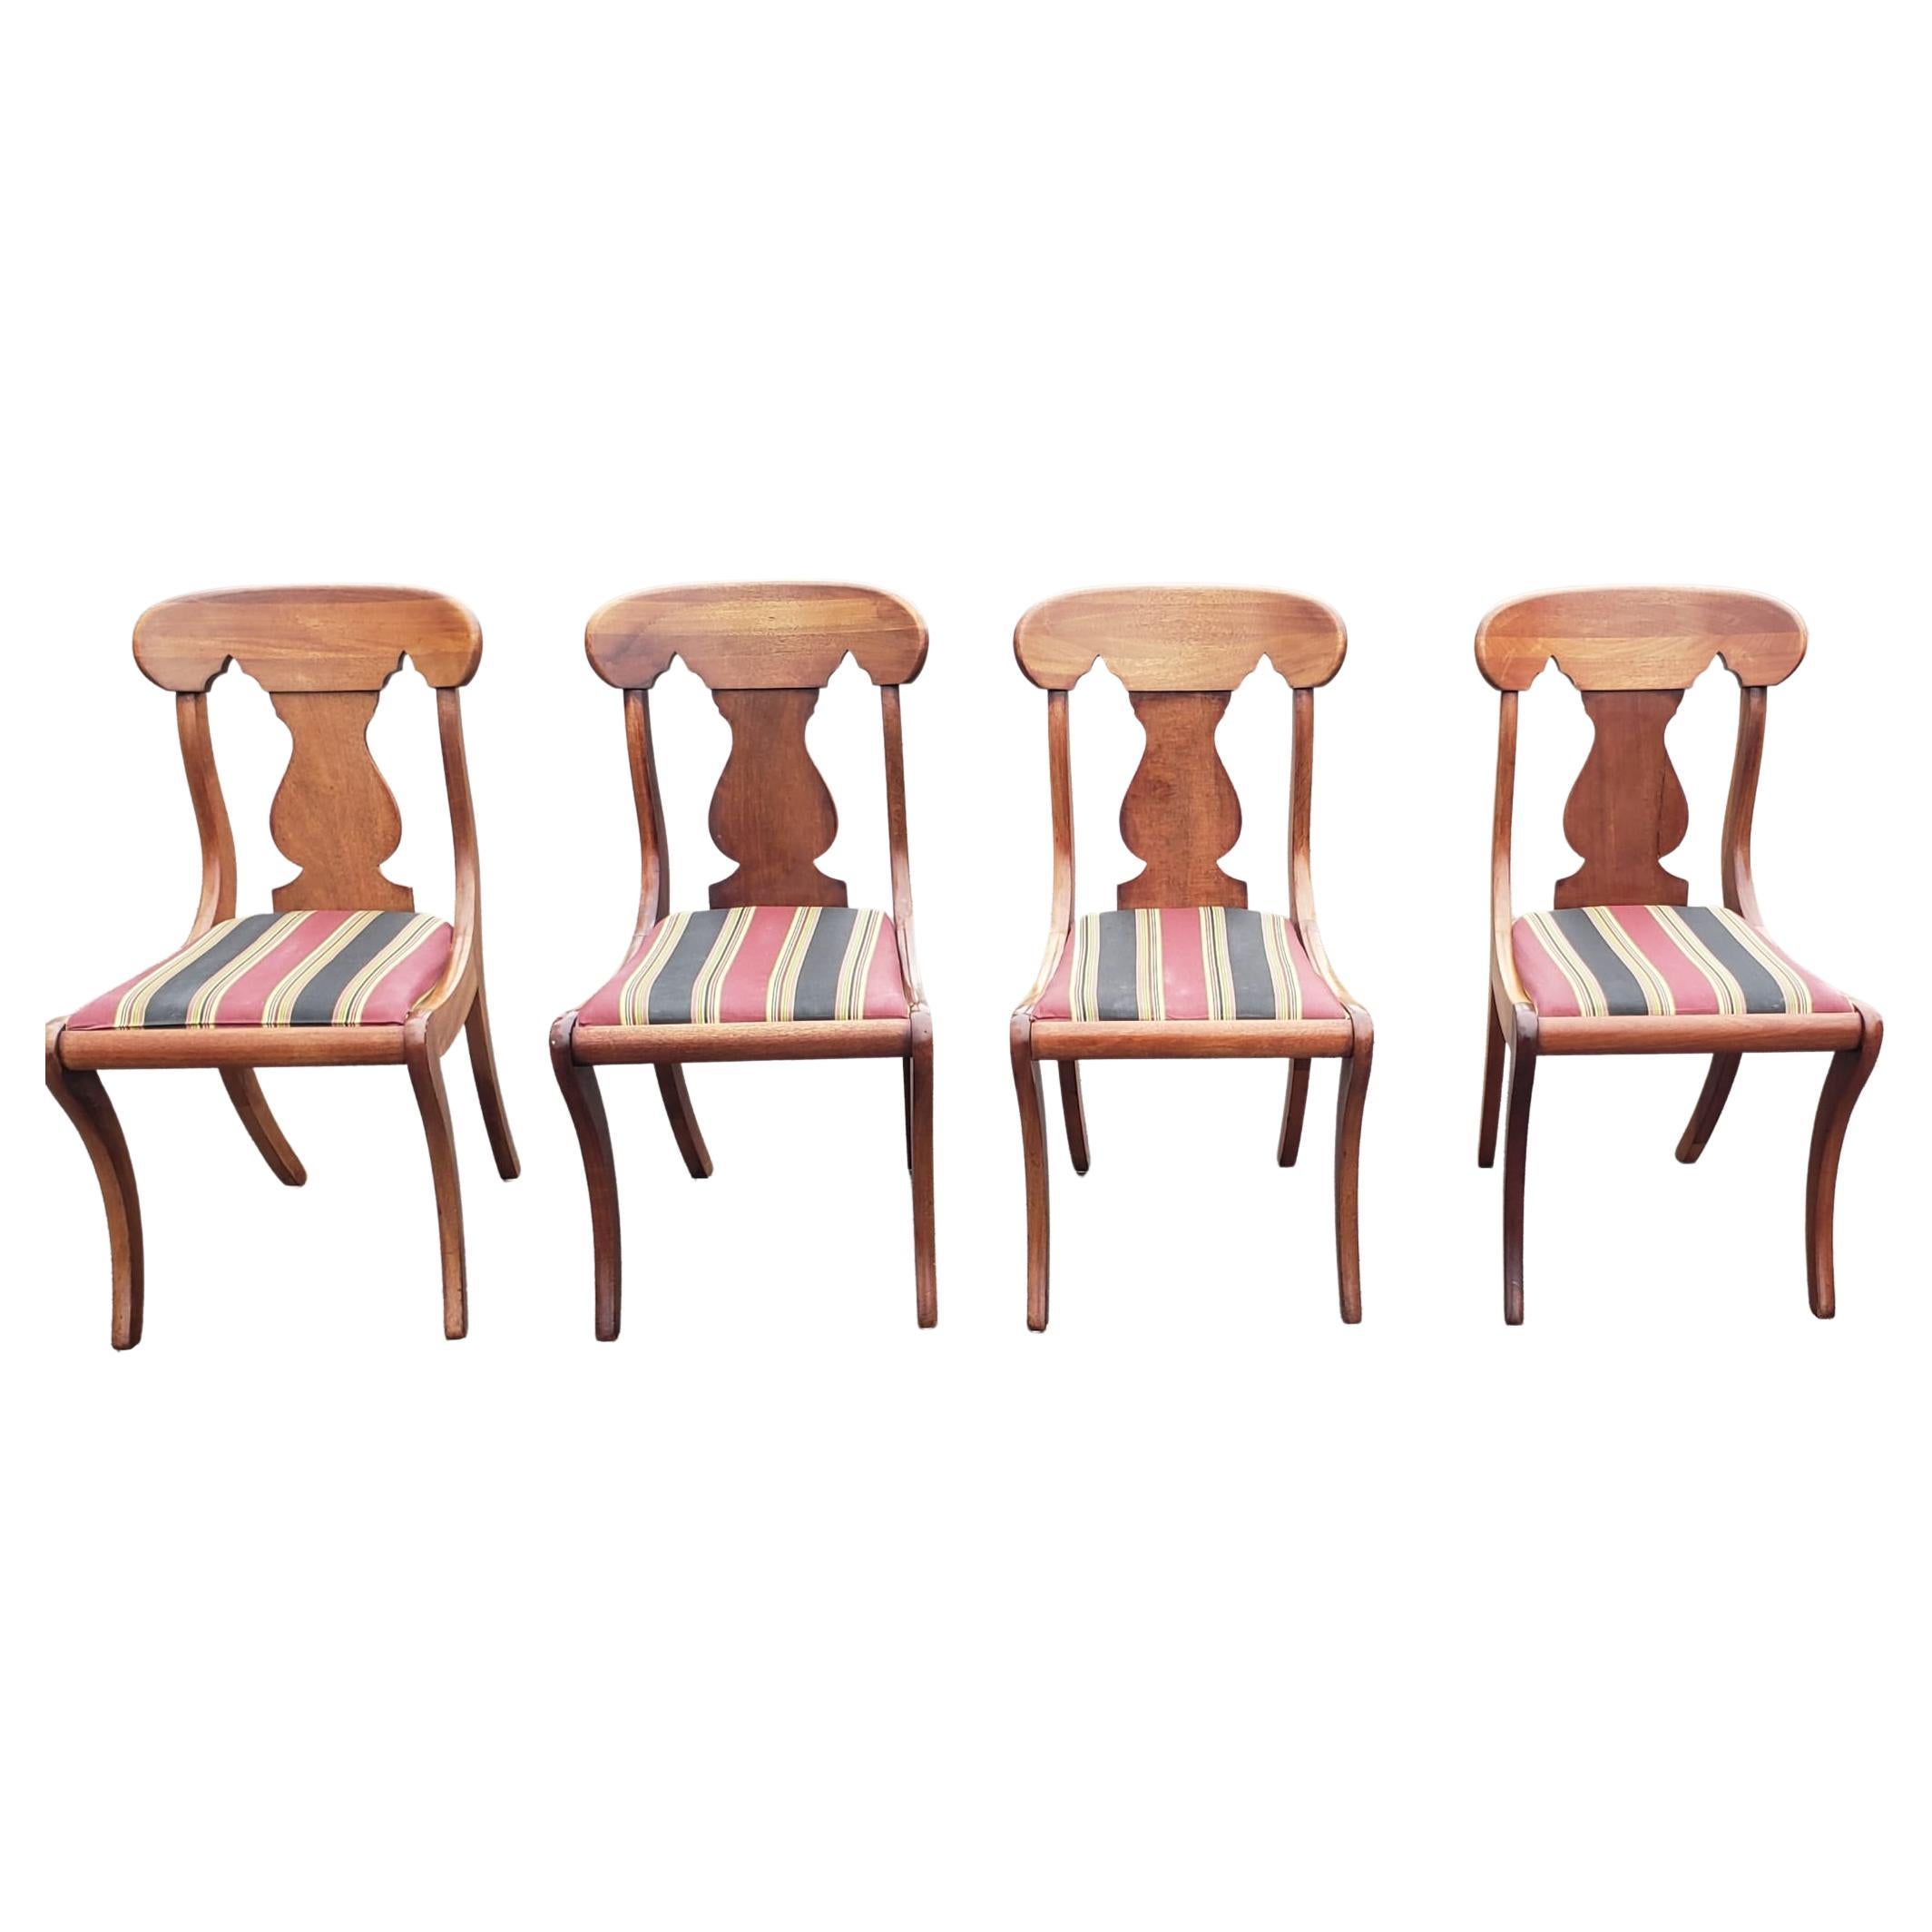 Stained 1930s Hickory Chair Empire Klismos Mahogany and Upholstered Seat Side Chairs For Sale